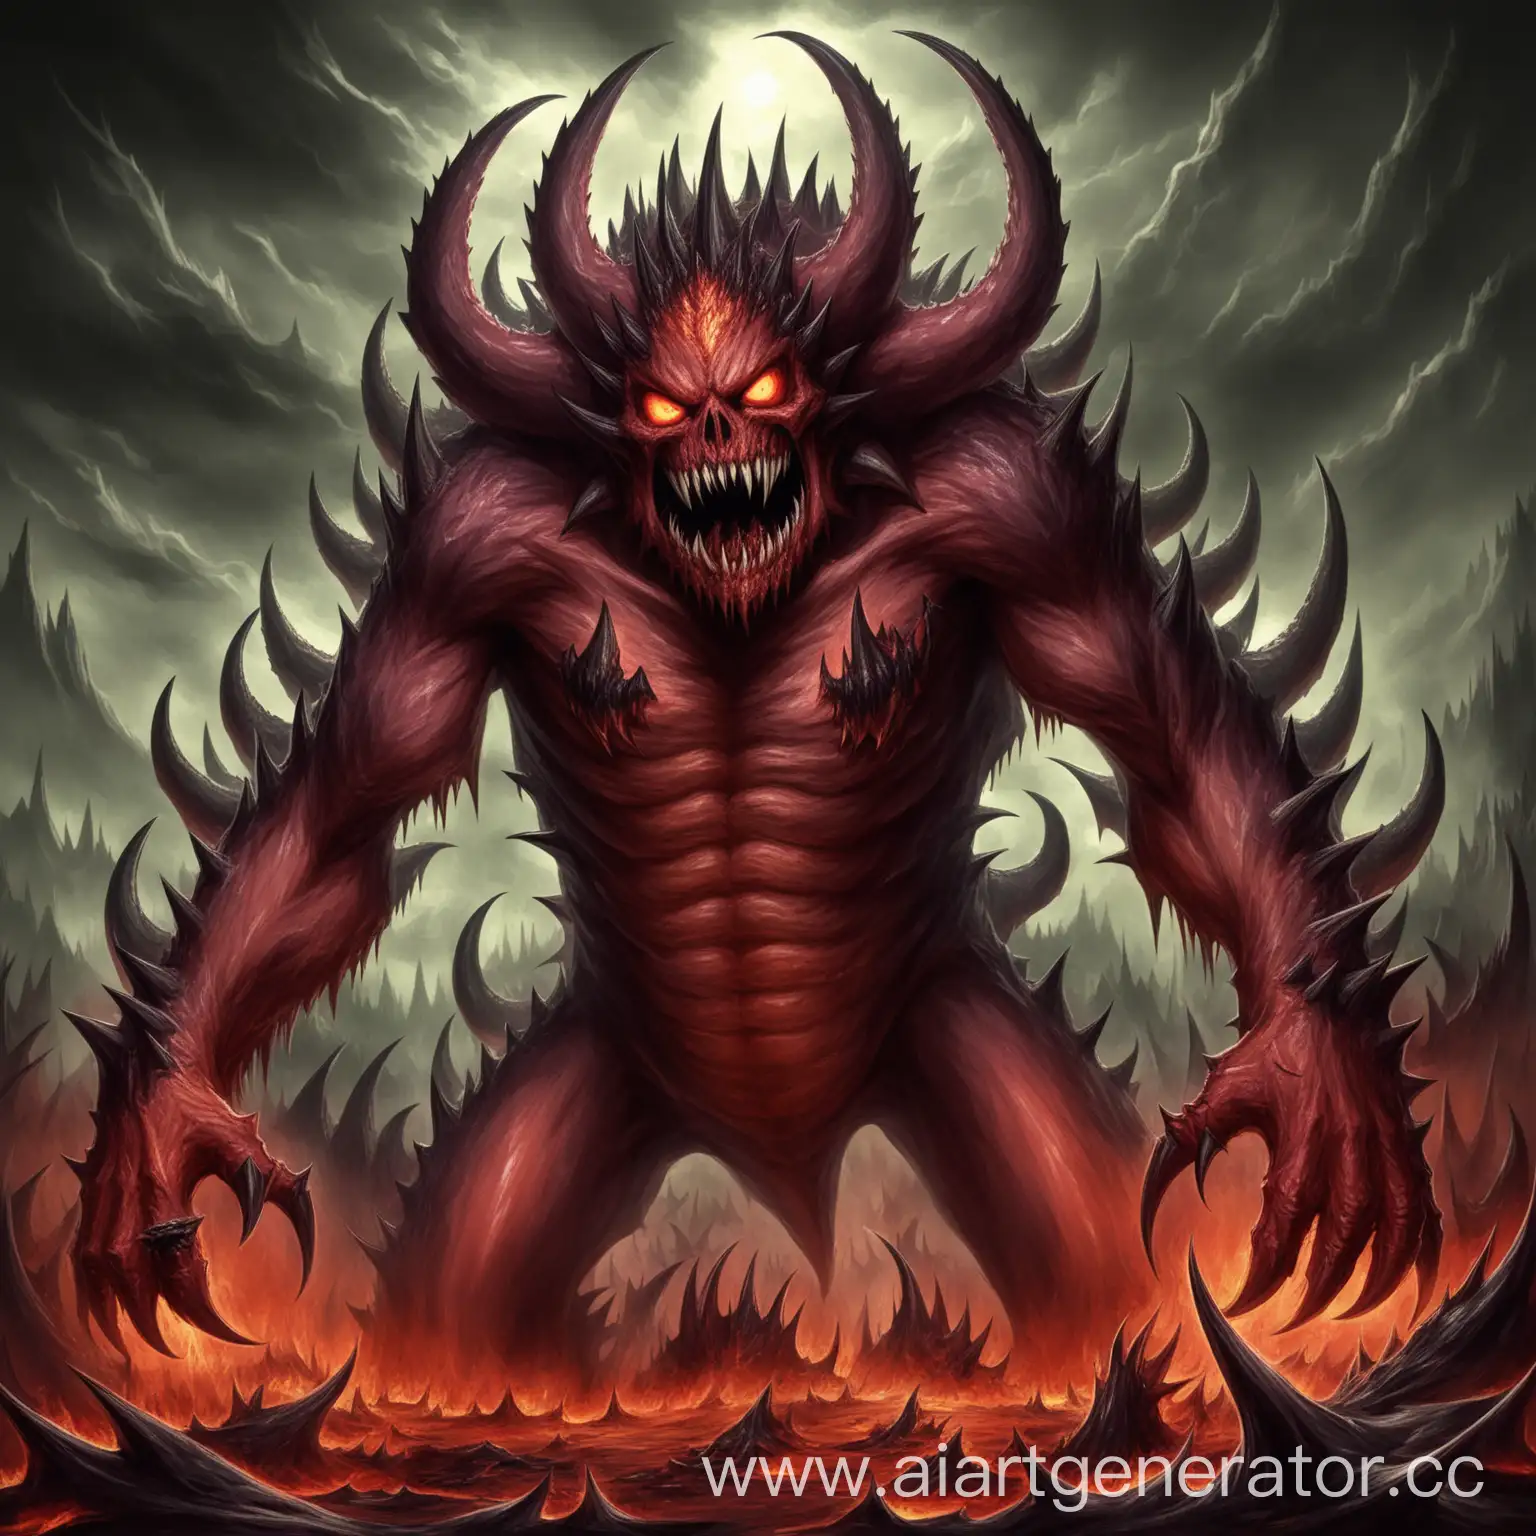 Sinister-Hellish-Monster-Emerging-from-Fiery-Abyss